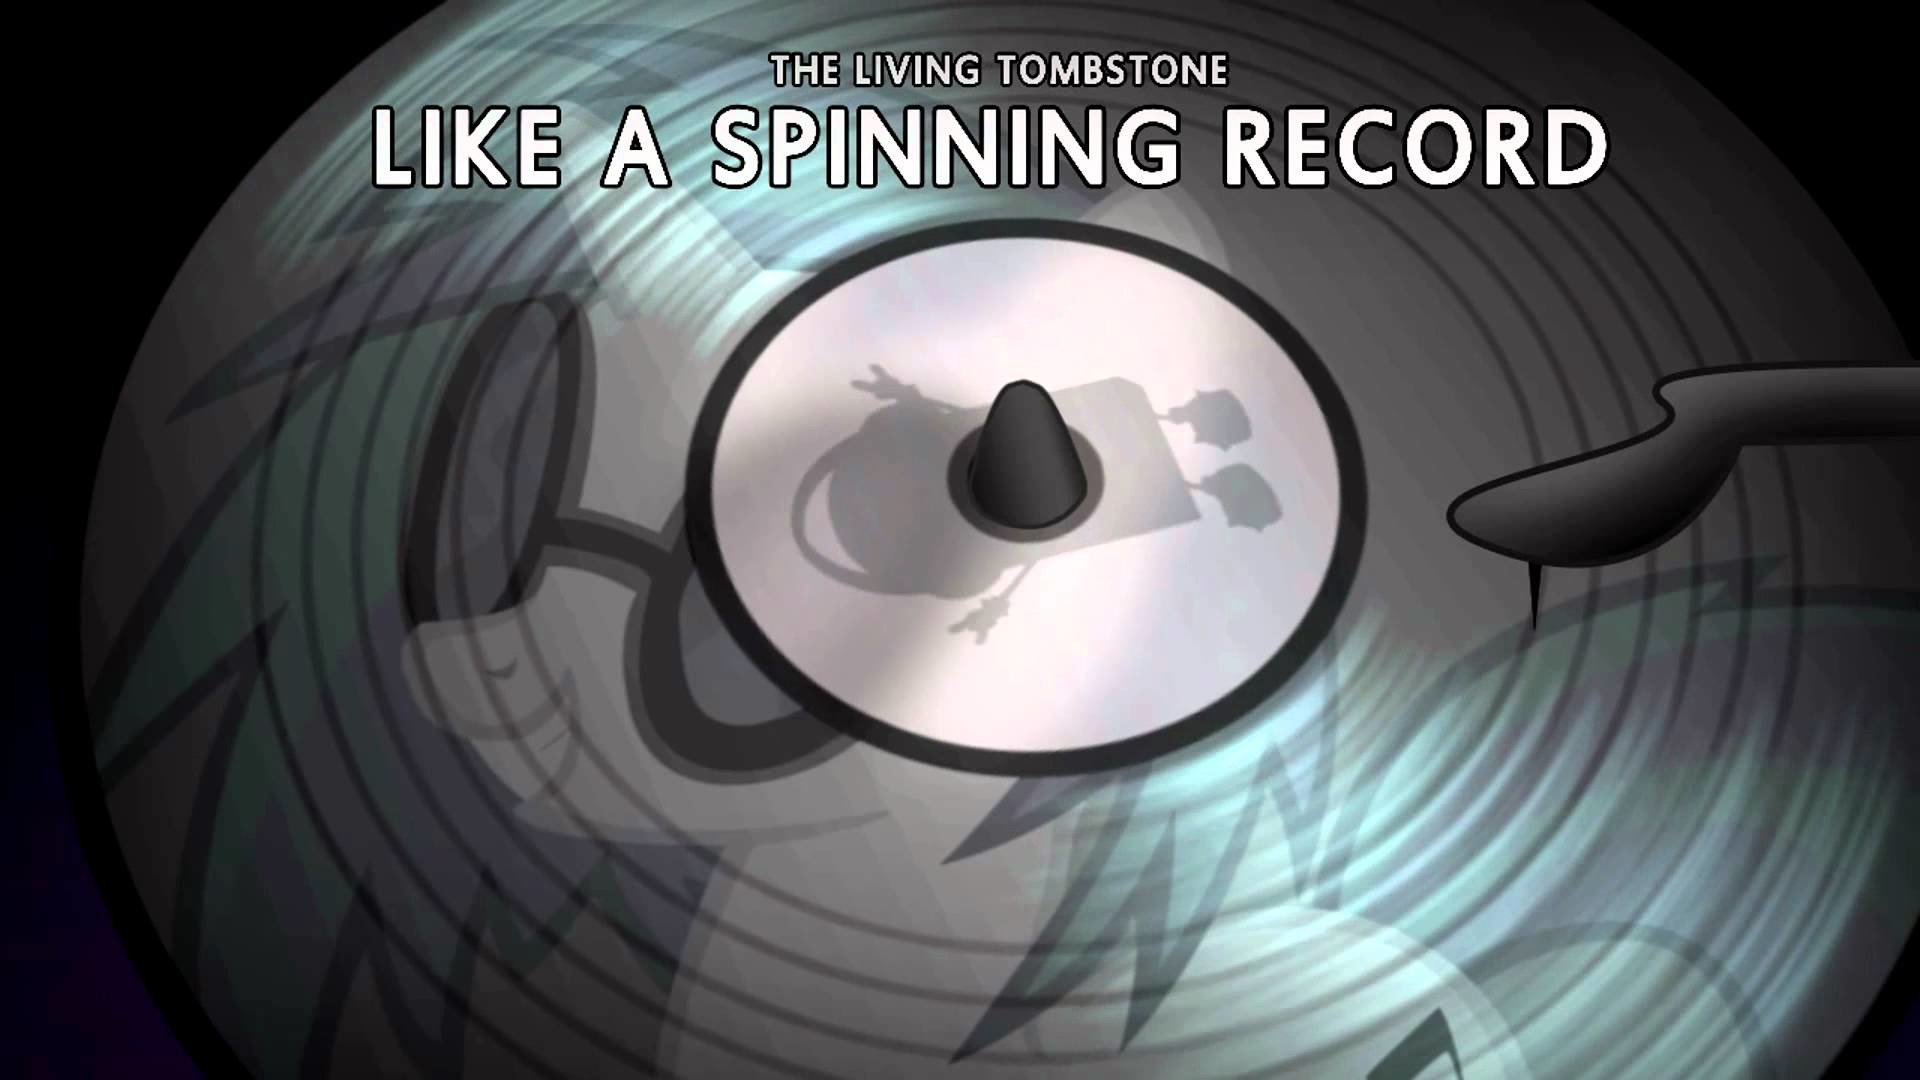 The Living Tombstone - Like a Spinning Record (비트, 신남, 경쾌, 일렉트로닉)